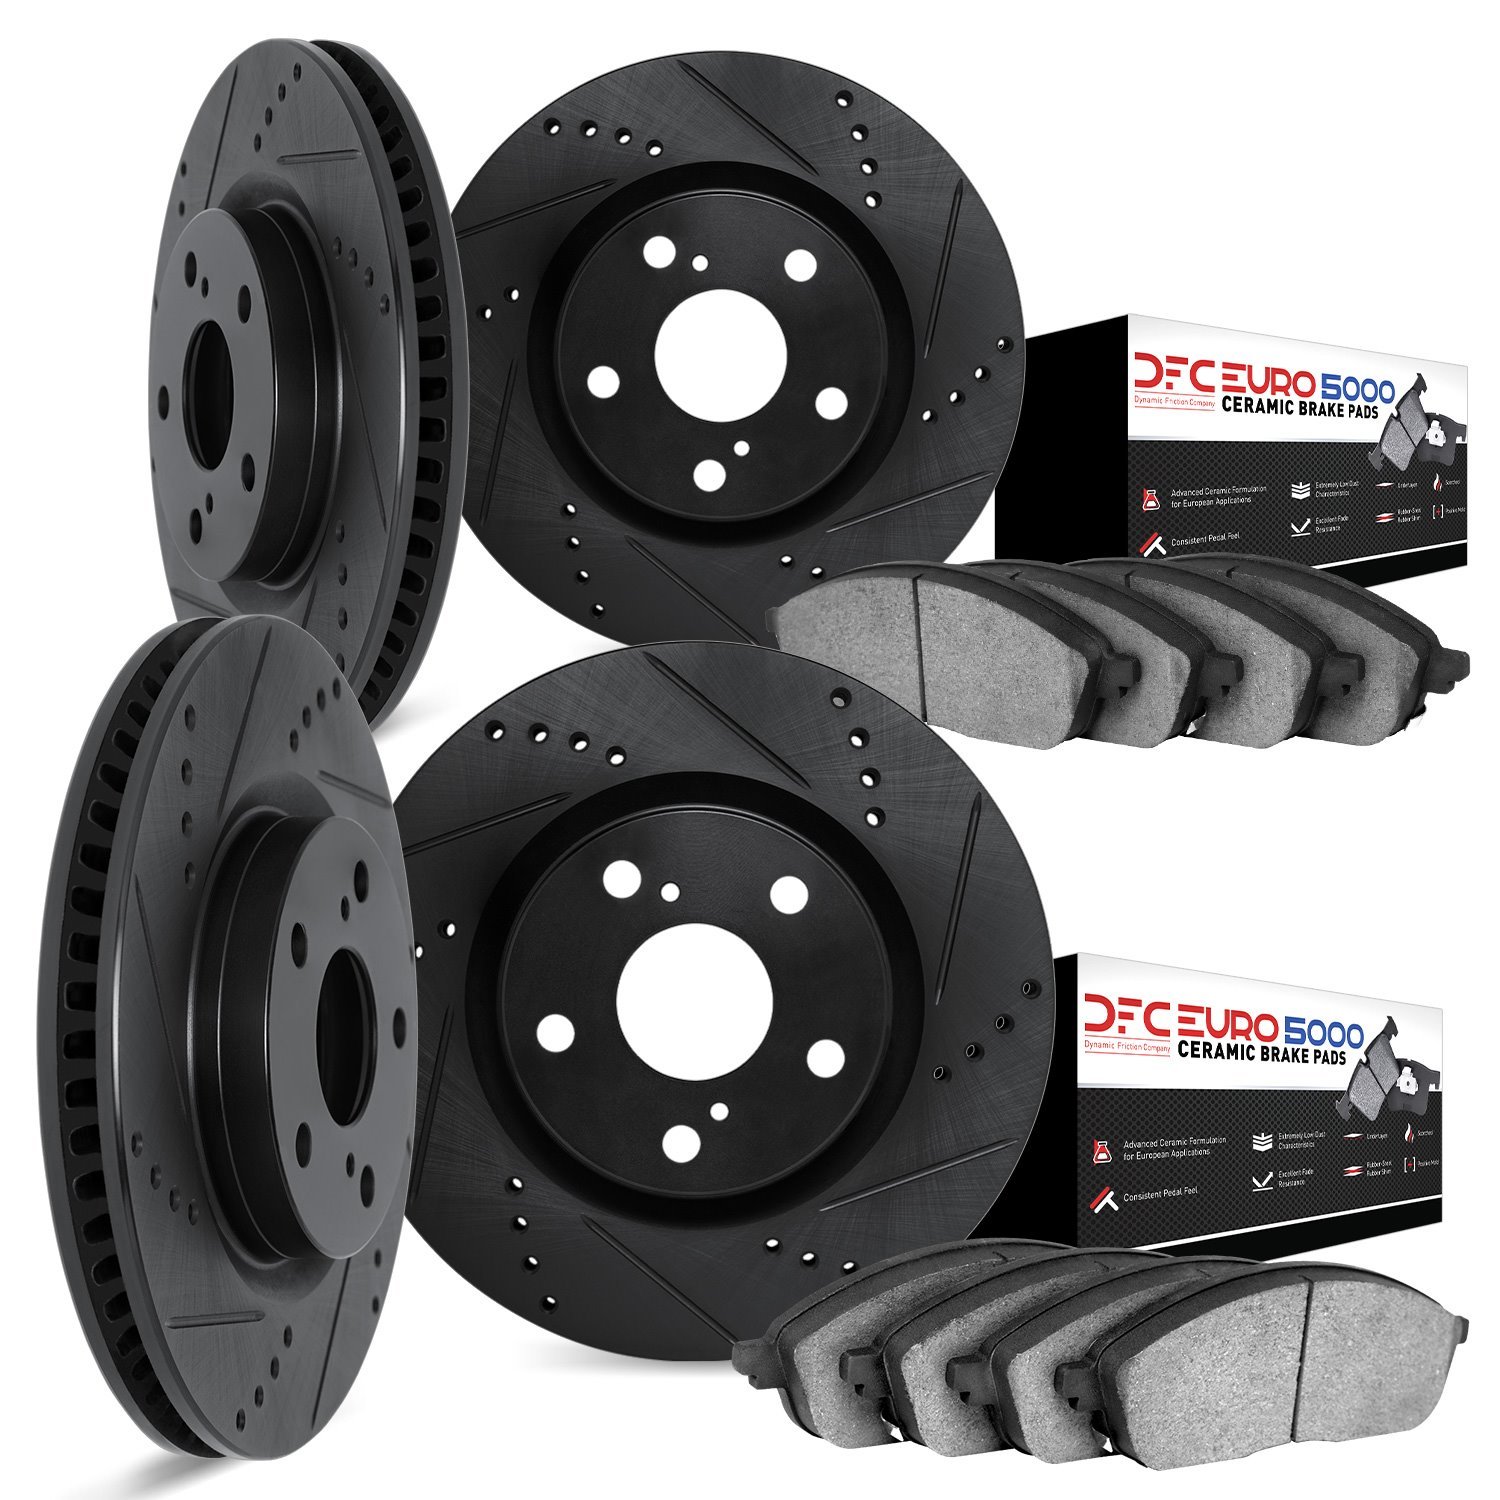 8604-02006 Drilled/Slotted Brake Rotors w/5000 Euro Ceramic Brake Pads Kit [Black], 1991-1994 Porsche, Position: Front and Rear